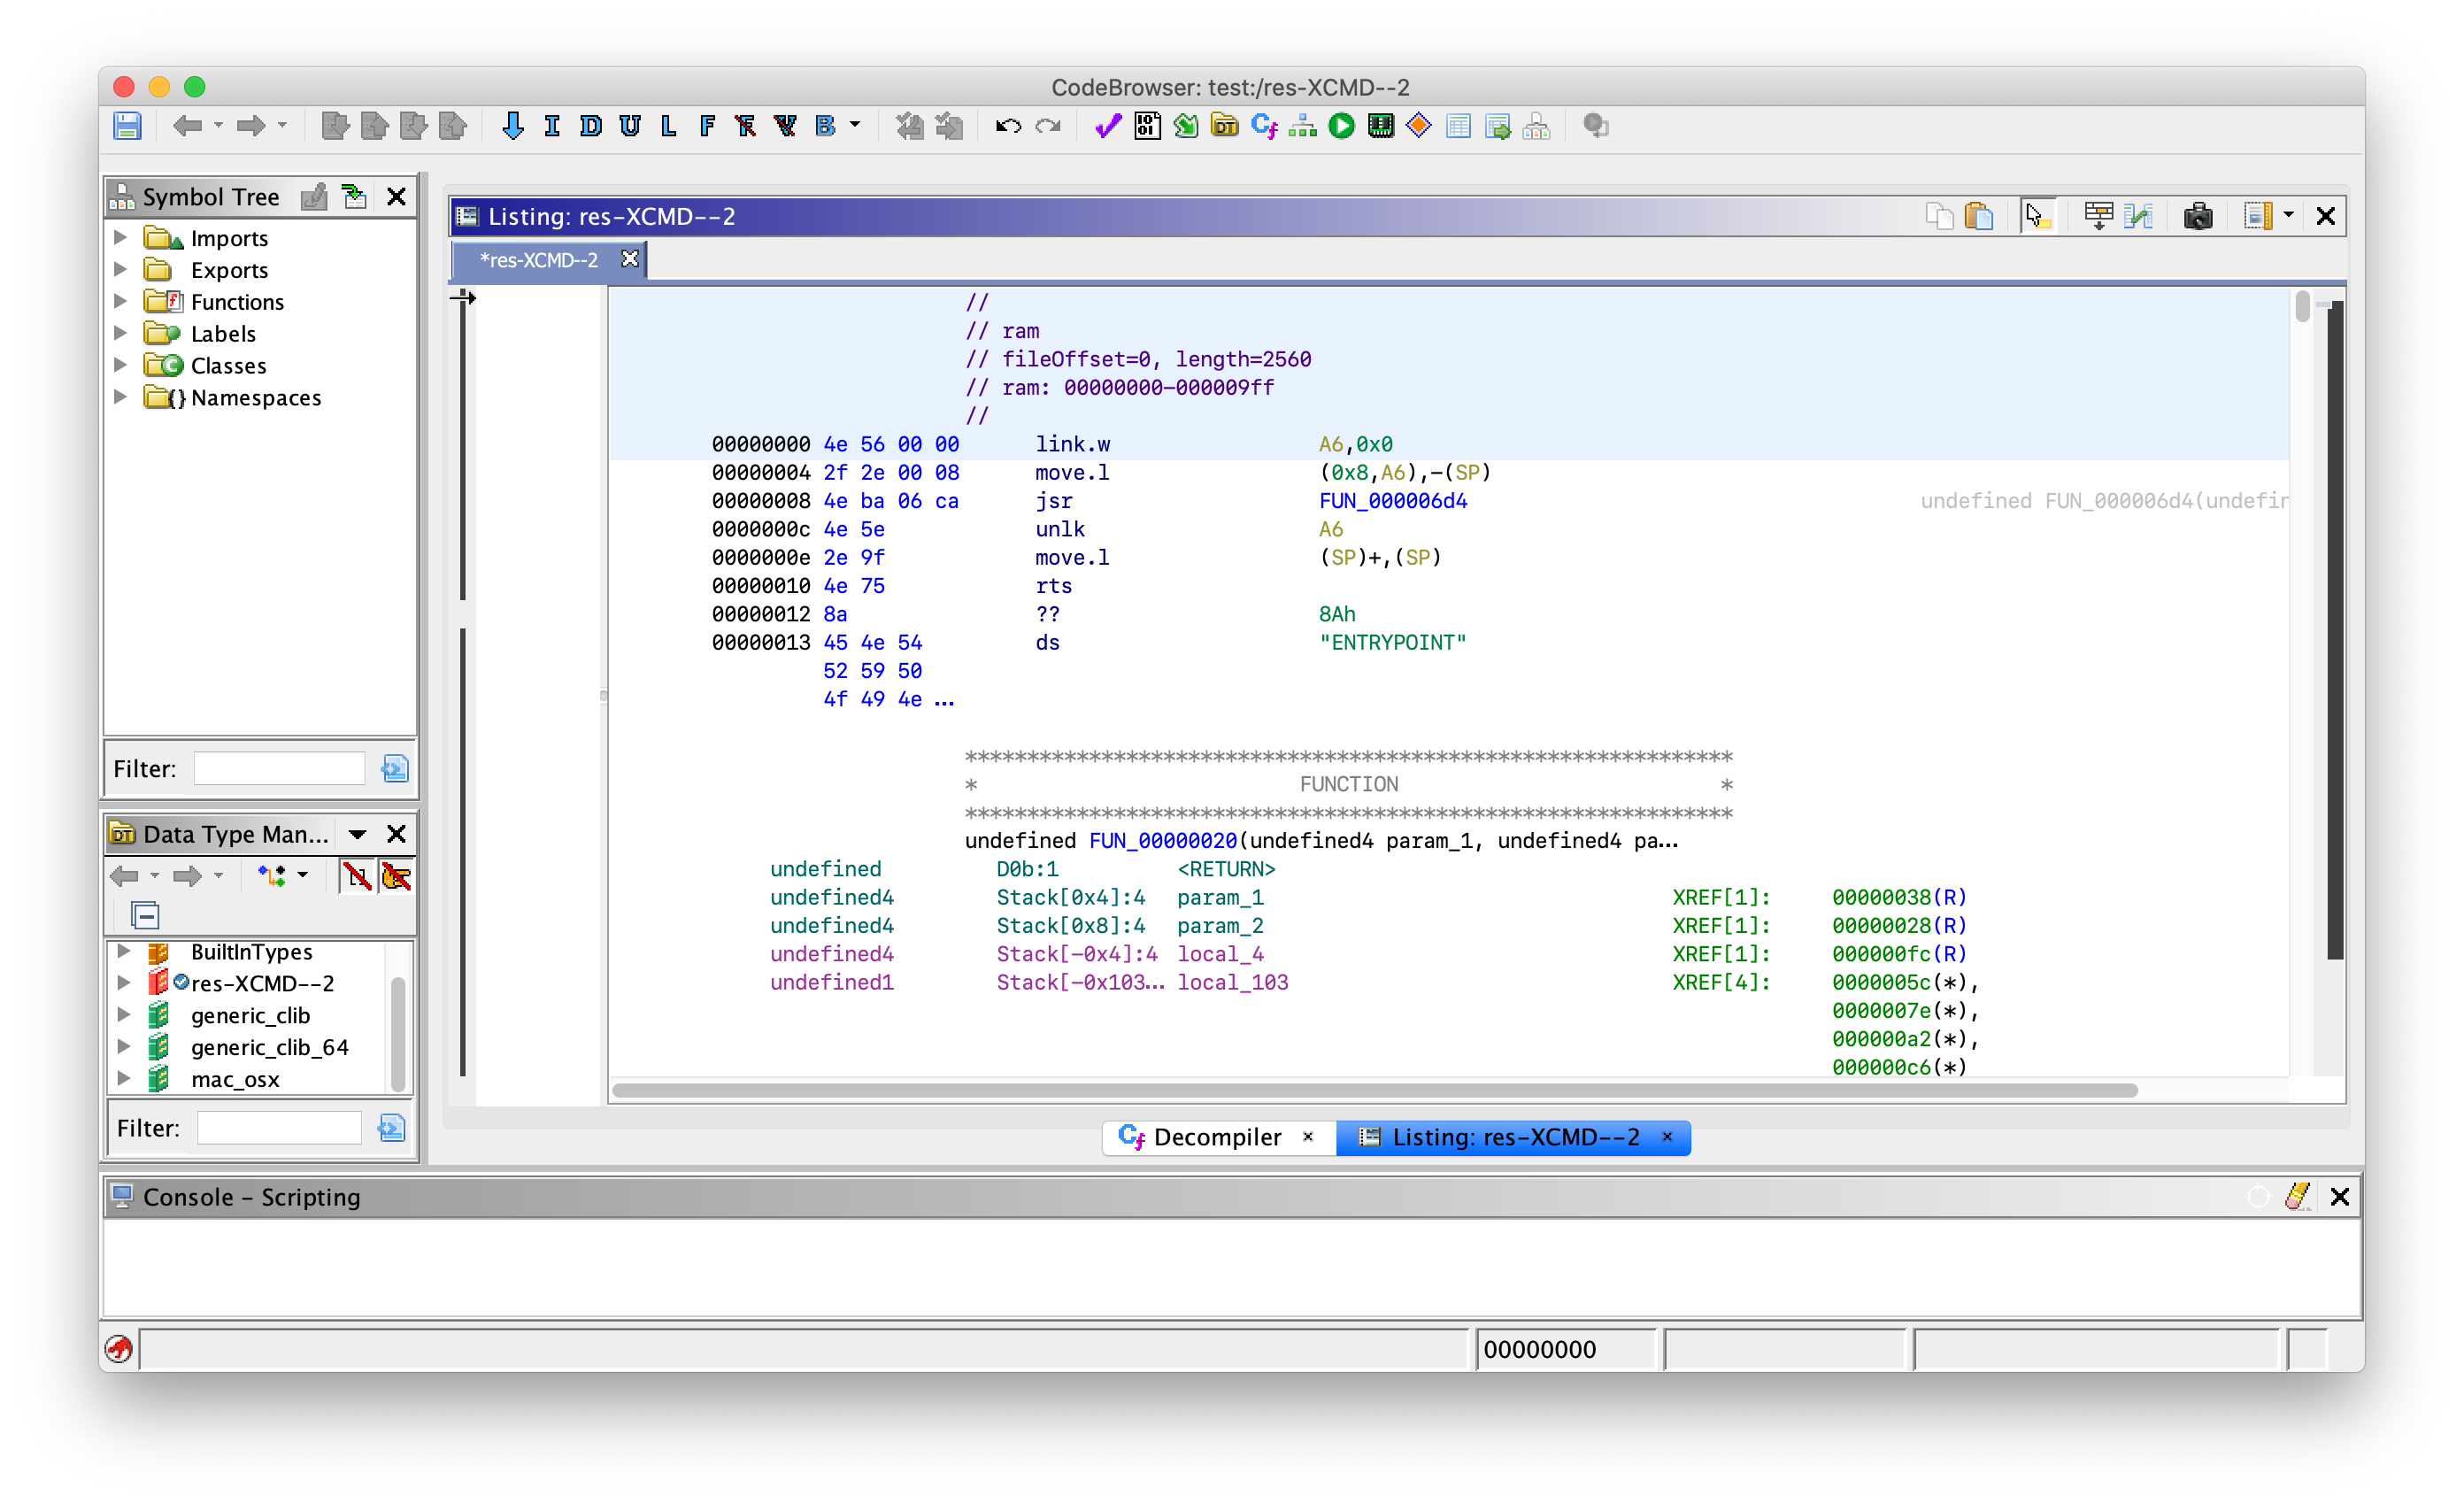 The WatnessSolver XKMD loaded into Ghidra, showing automatic code detection and function recovery